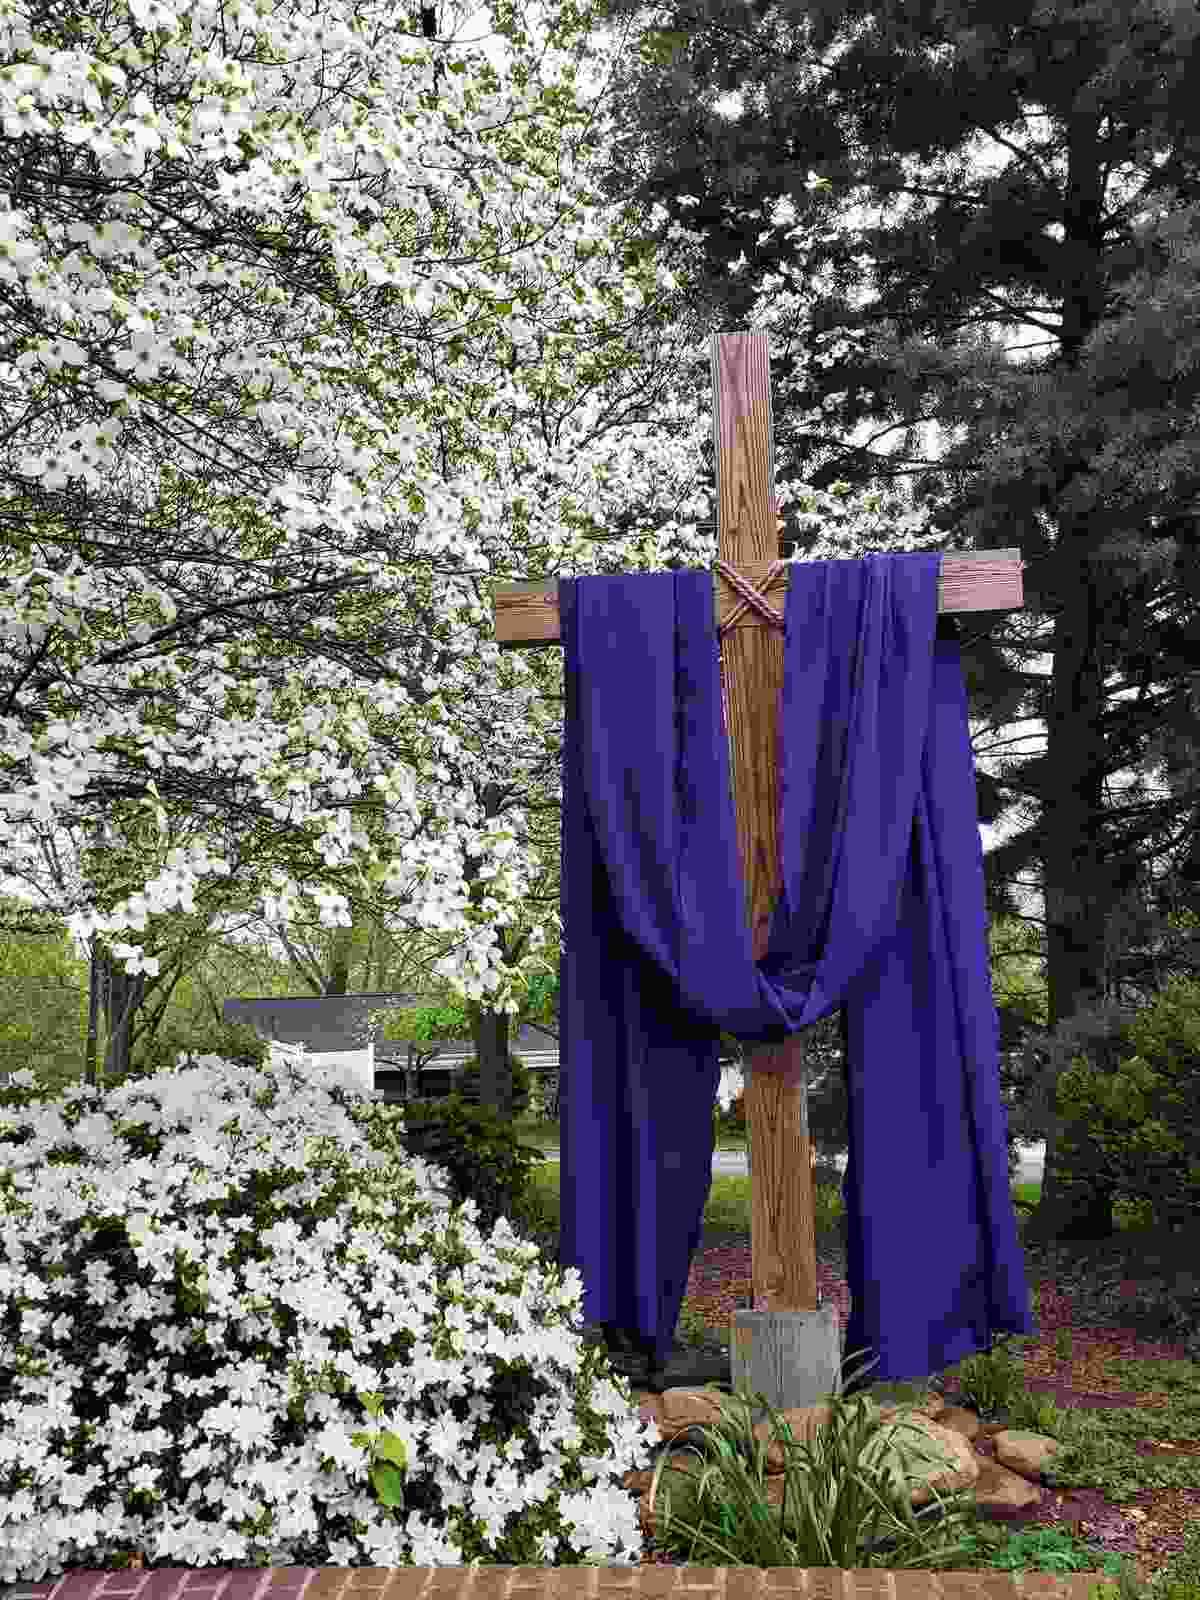 A dogwood cross with a purple lenten sash standing next to a field of dogwood trees.